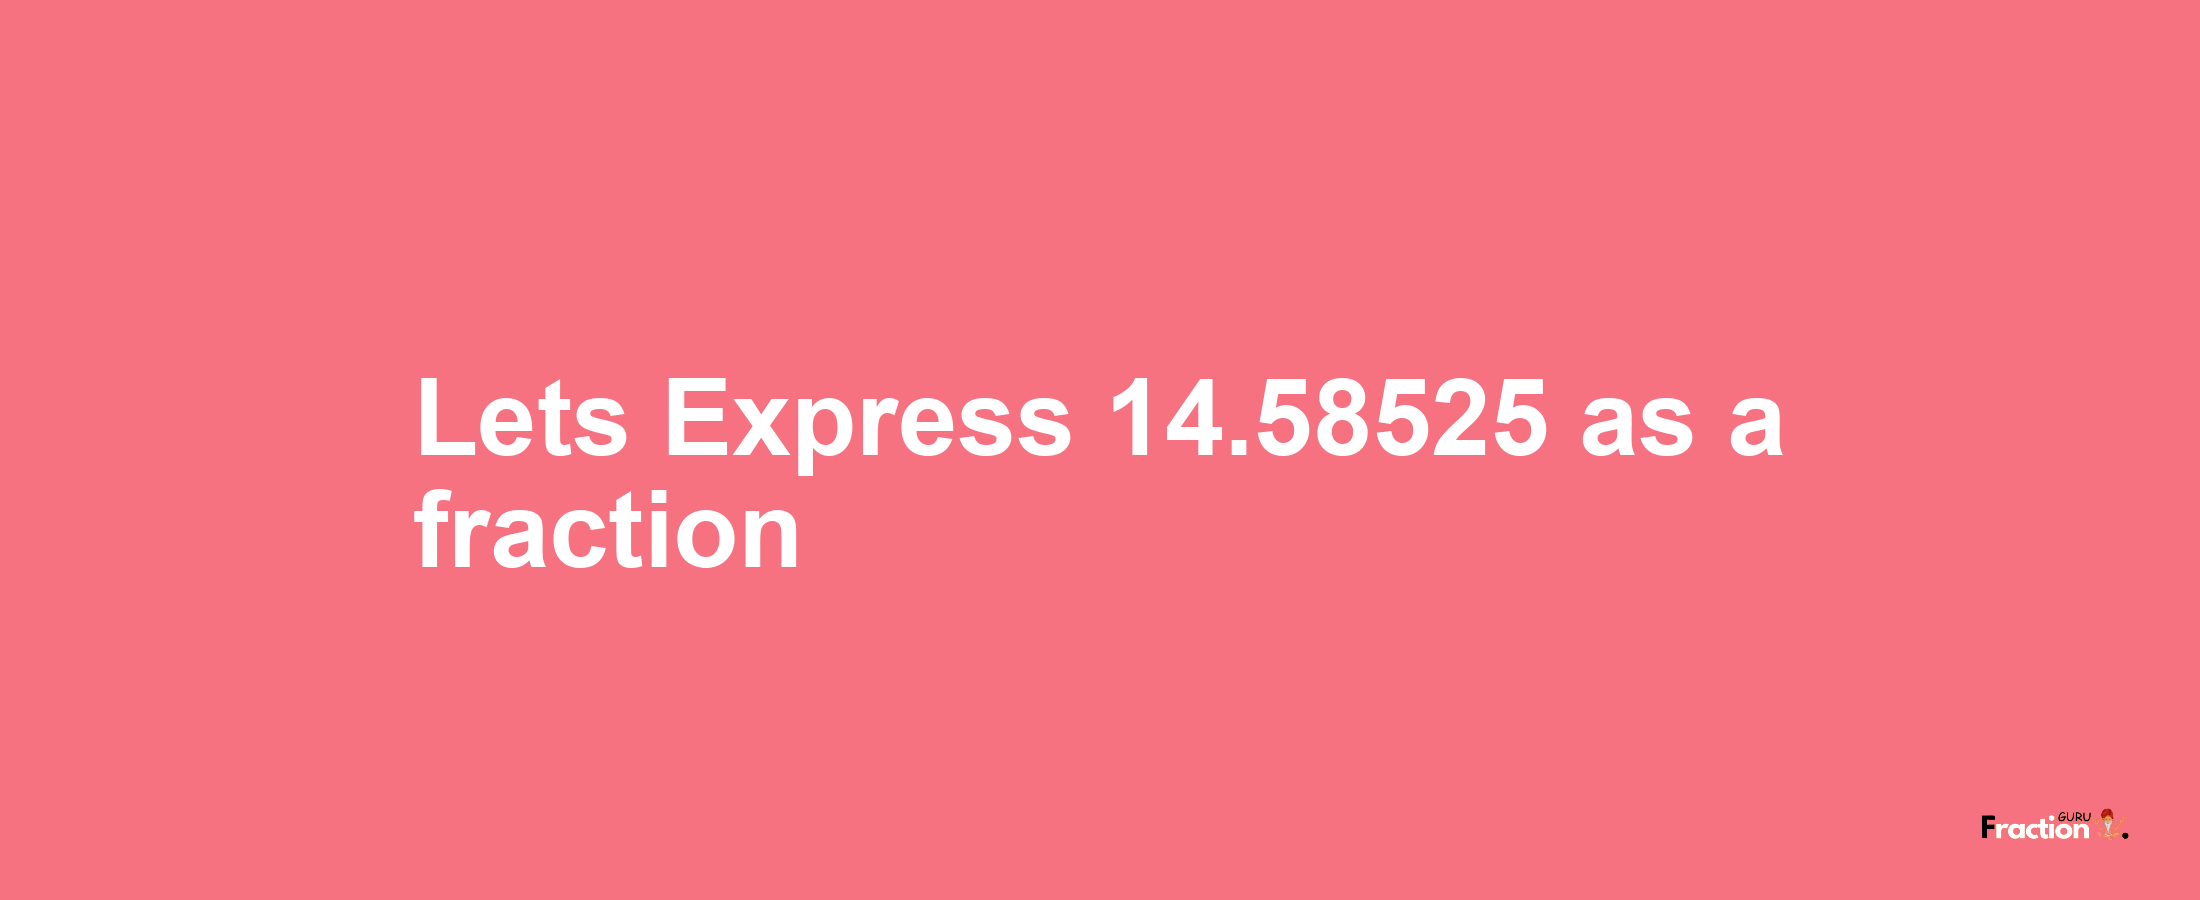 Lets Express 14.58525 as afraction